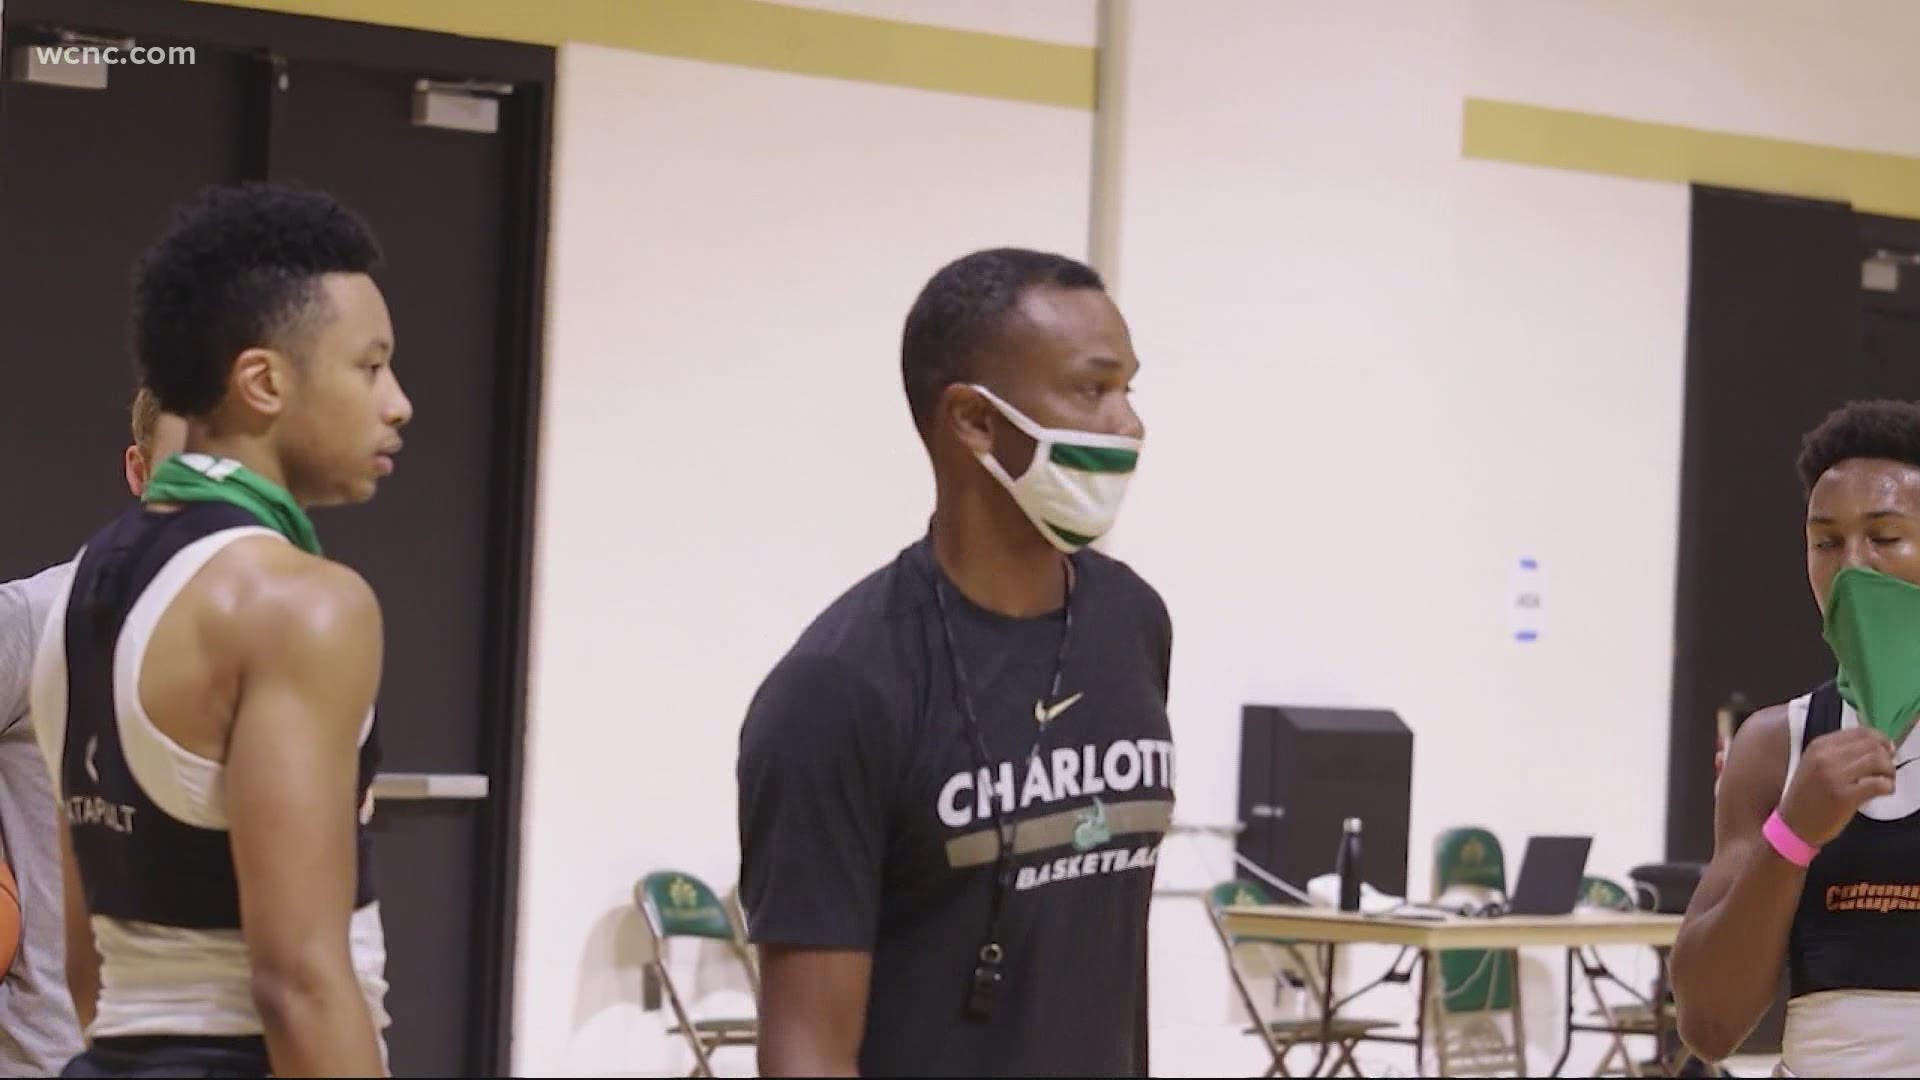 Charlotte Men's Basketball team slowly getting players back to the practice court